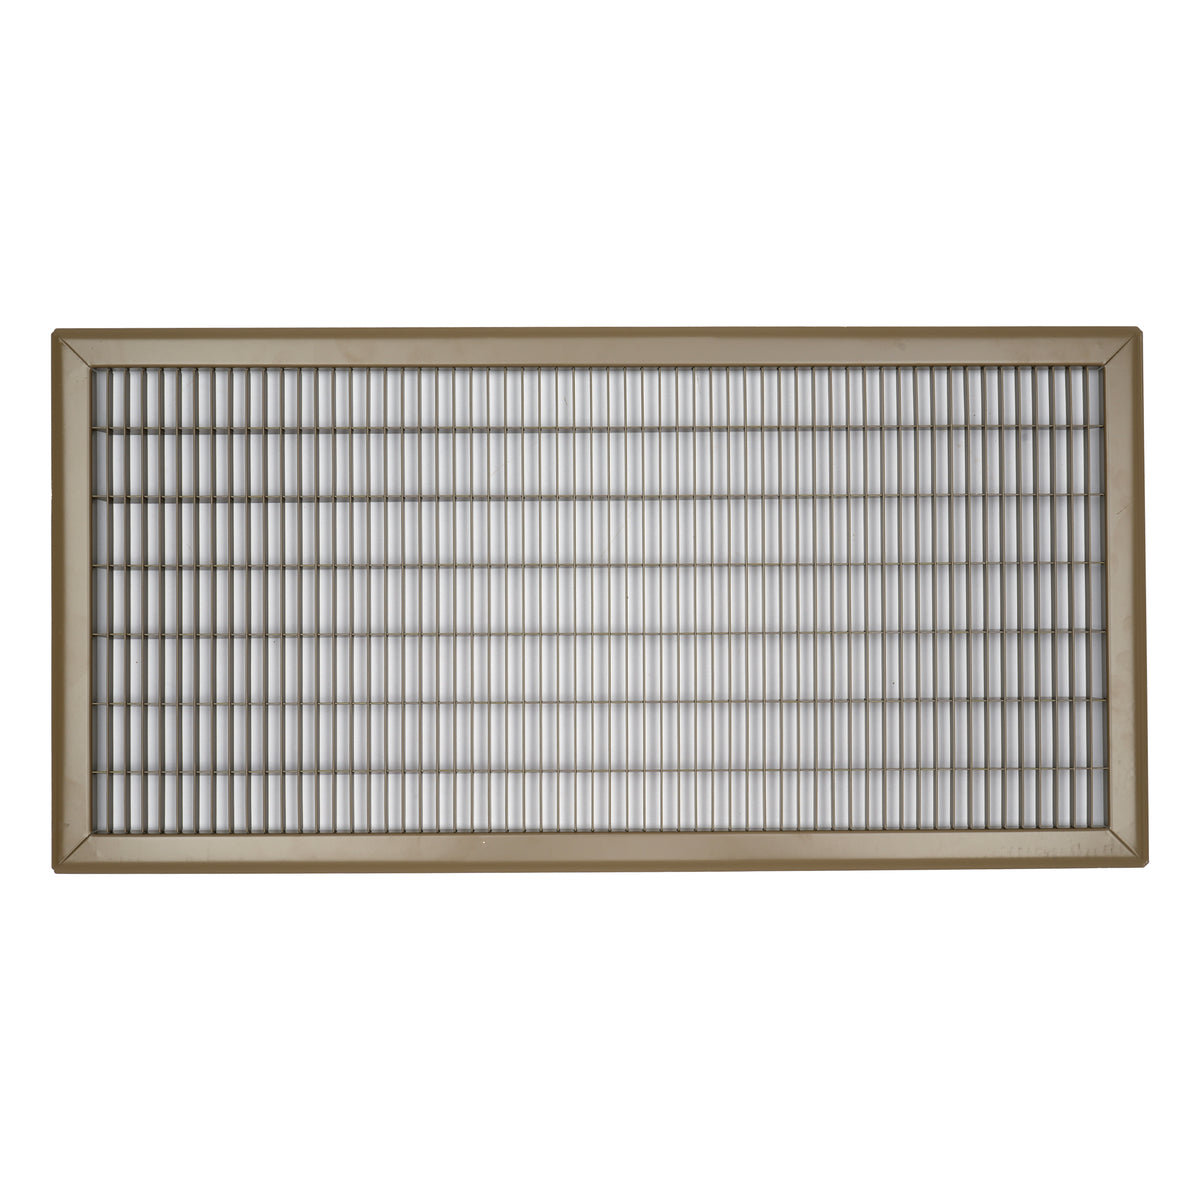 14"W x 30"H [Duct Opening] Return Air Floor Grille | Vent Cover Grill for Floor - Brown| Outer Dimensions: 15.75"W X 31.75"H